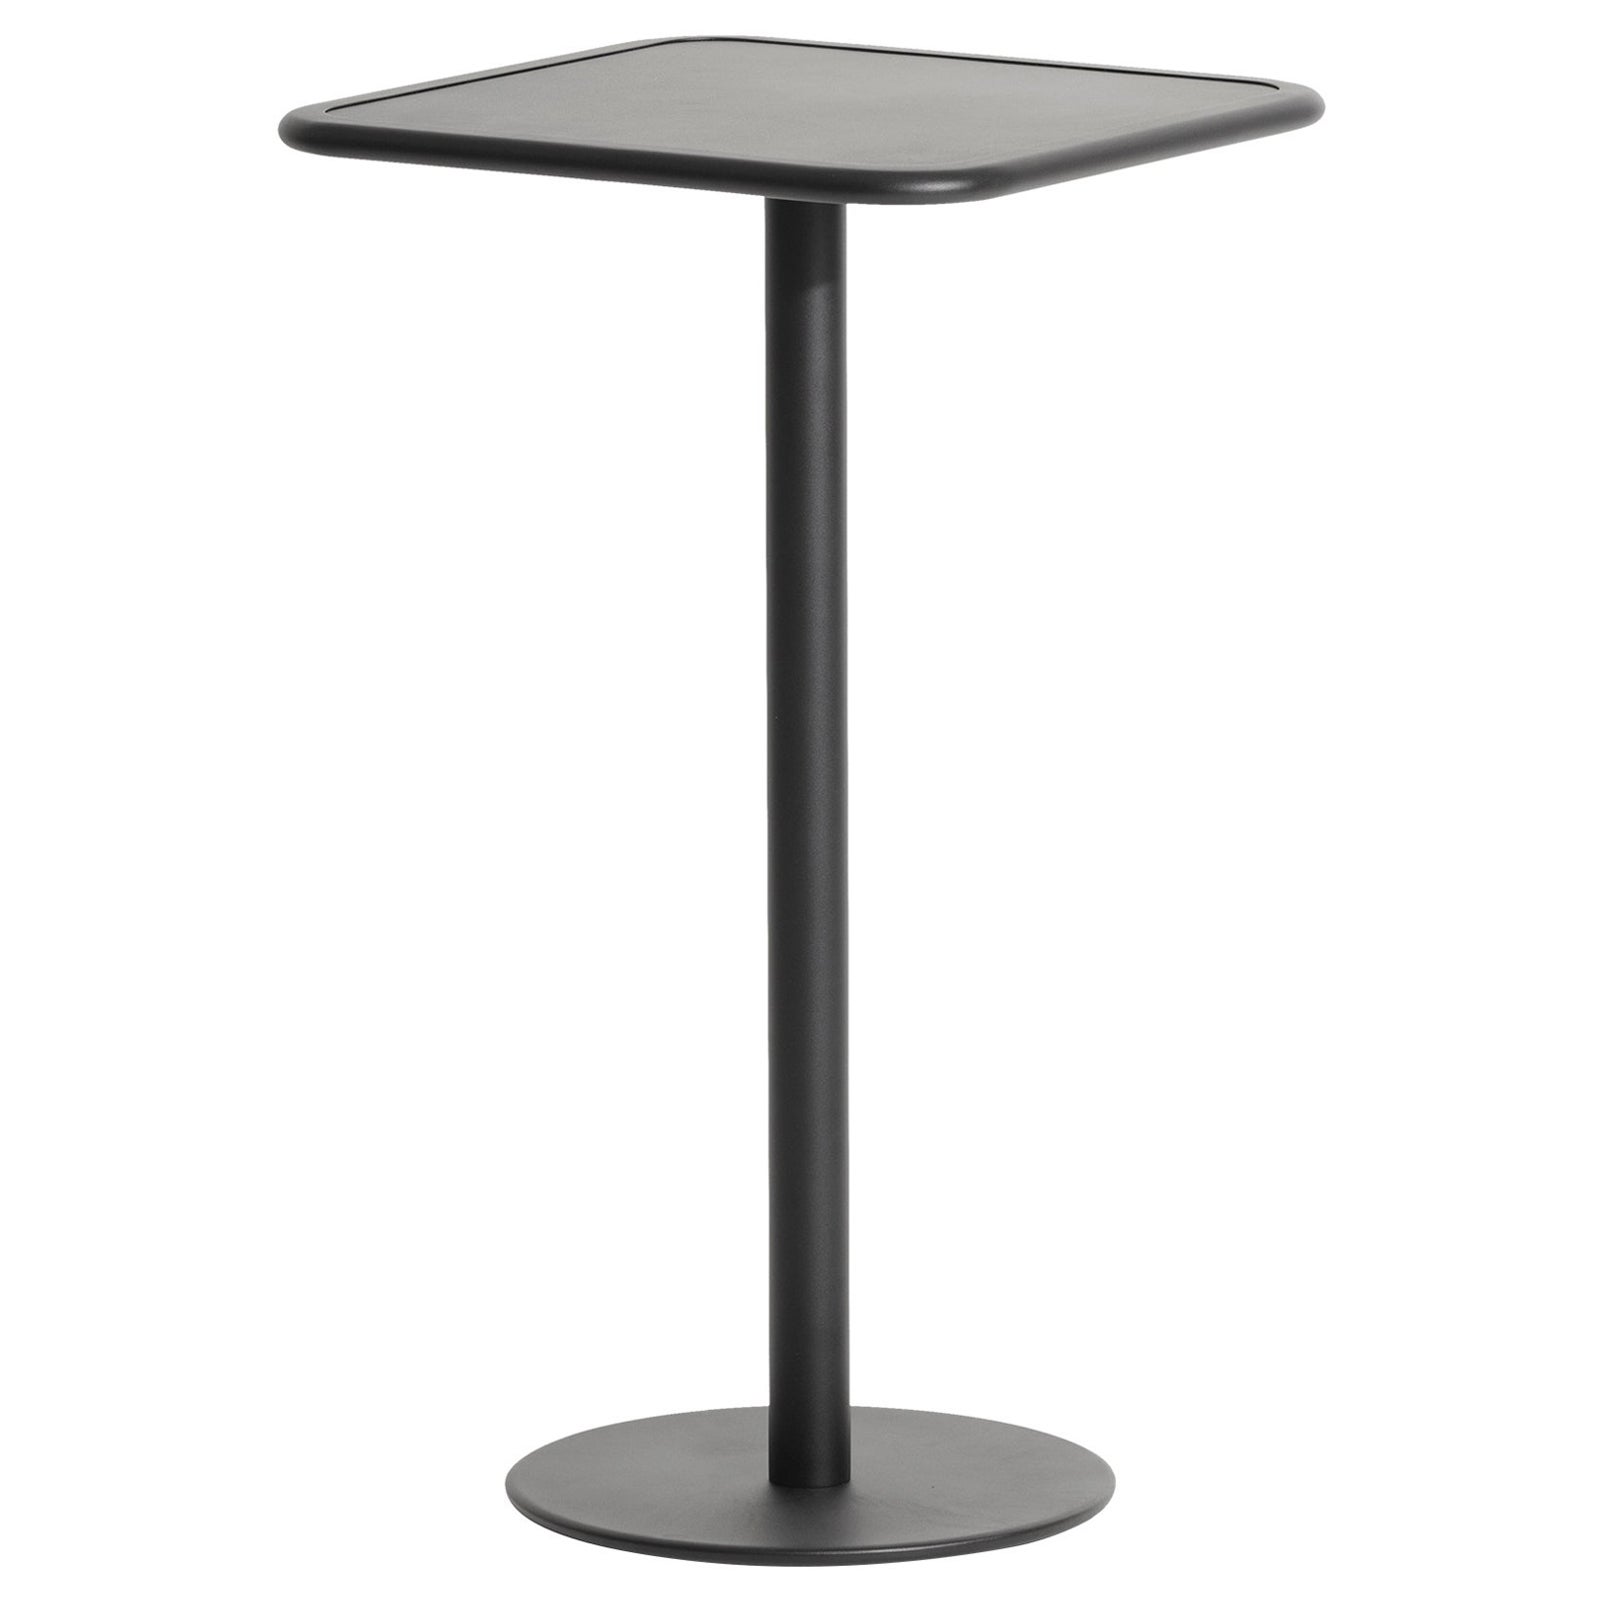 Petite Friture Week-End Square High Table in Black Aluminium, 2017 For Sale